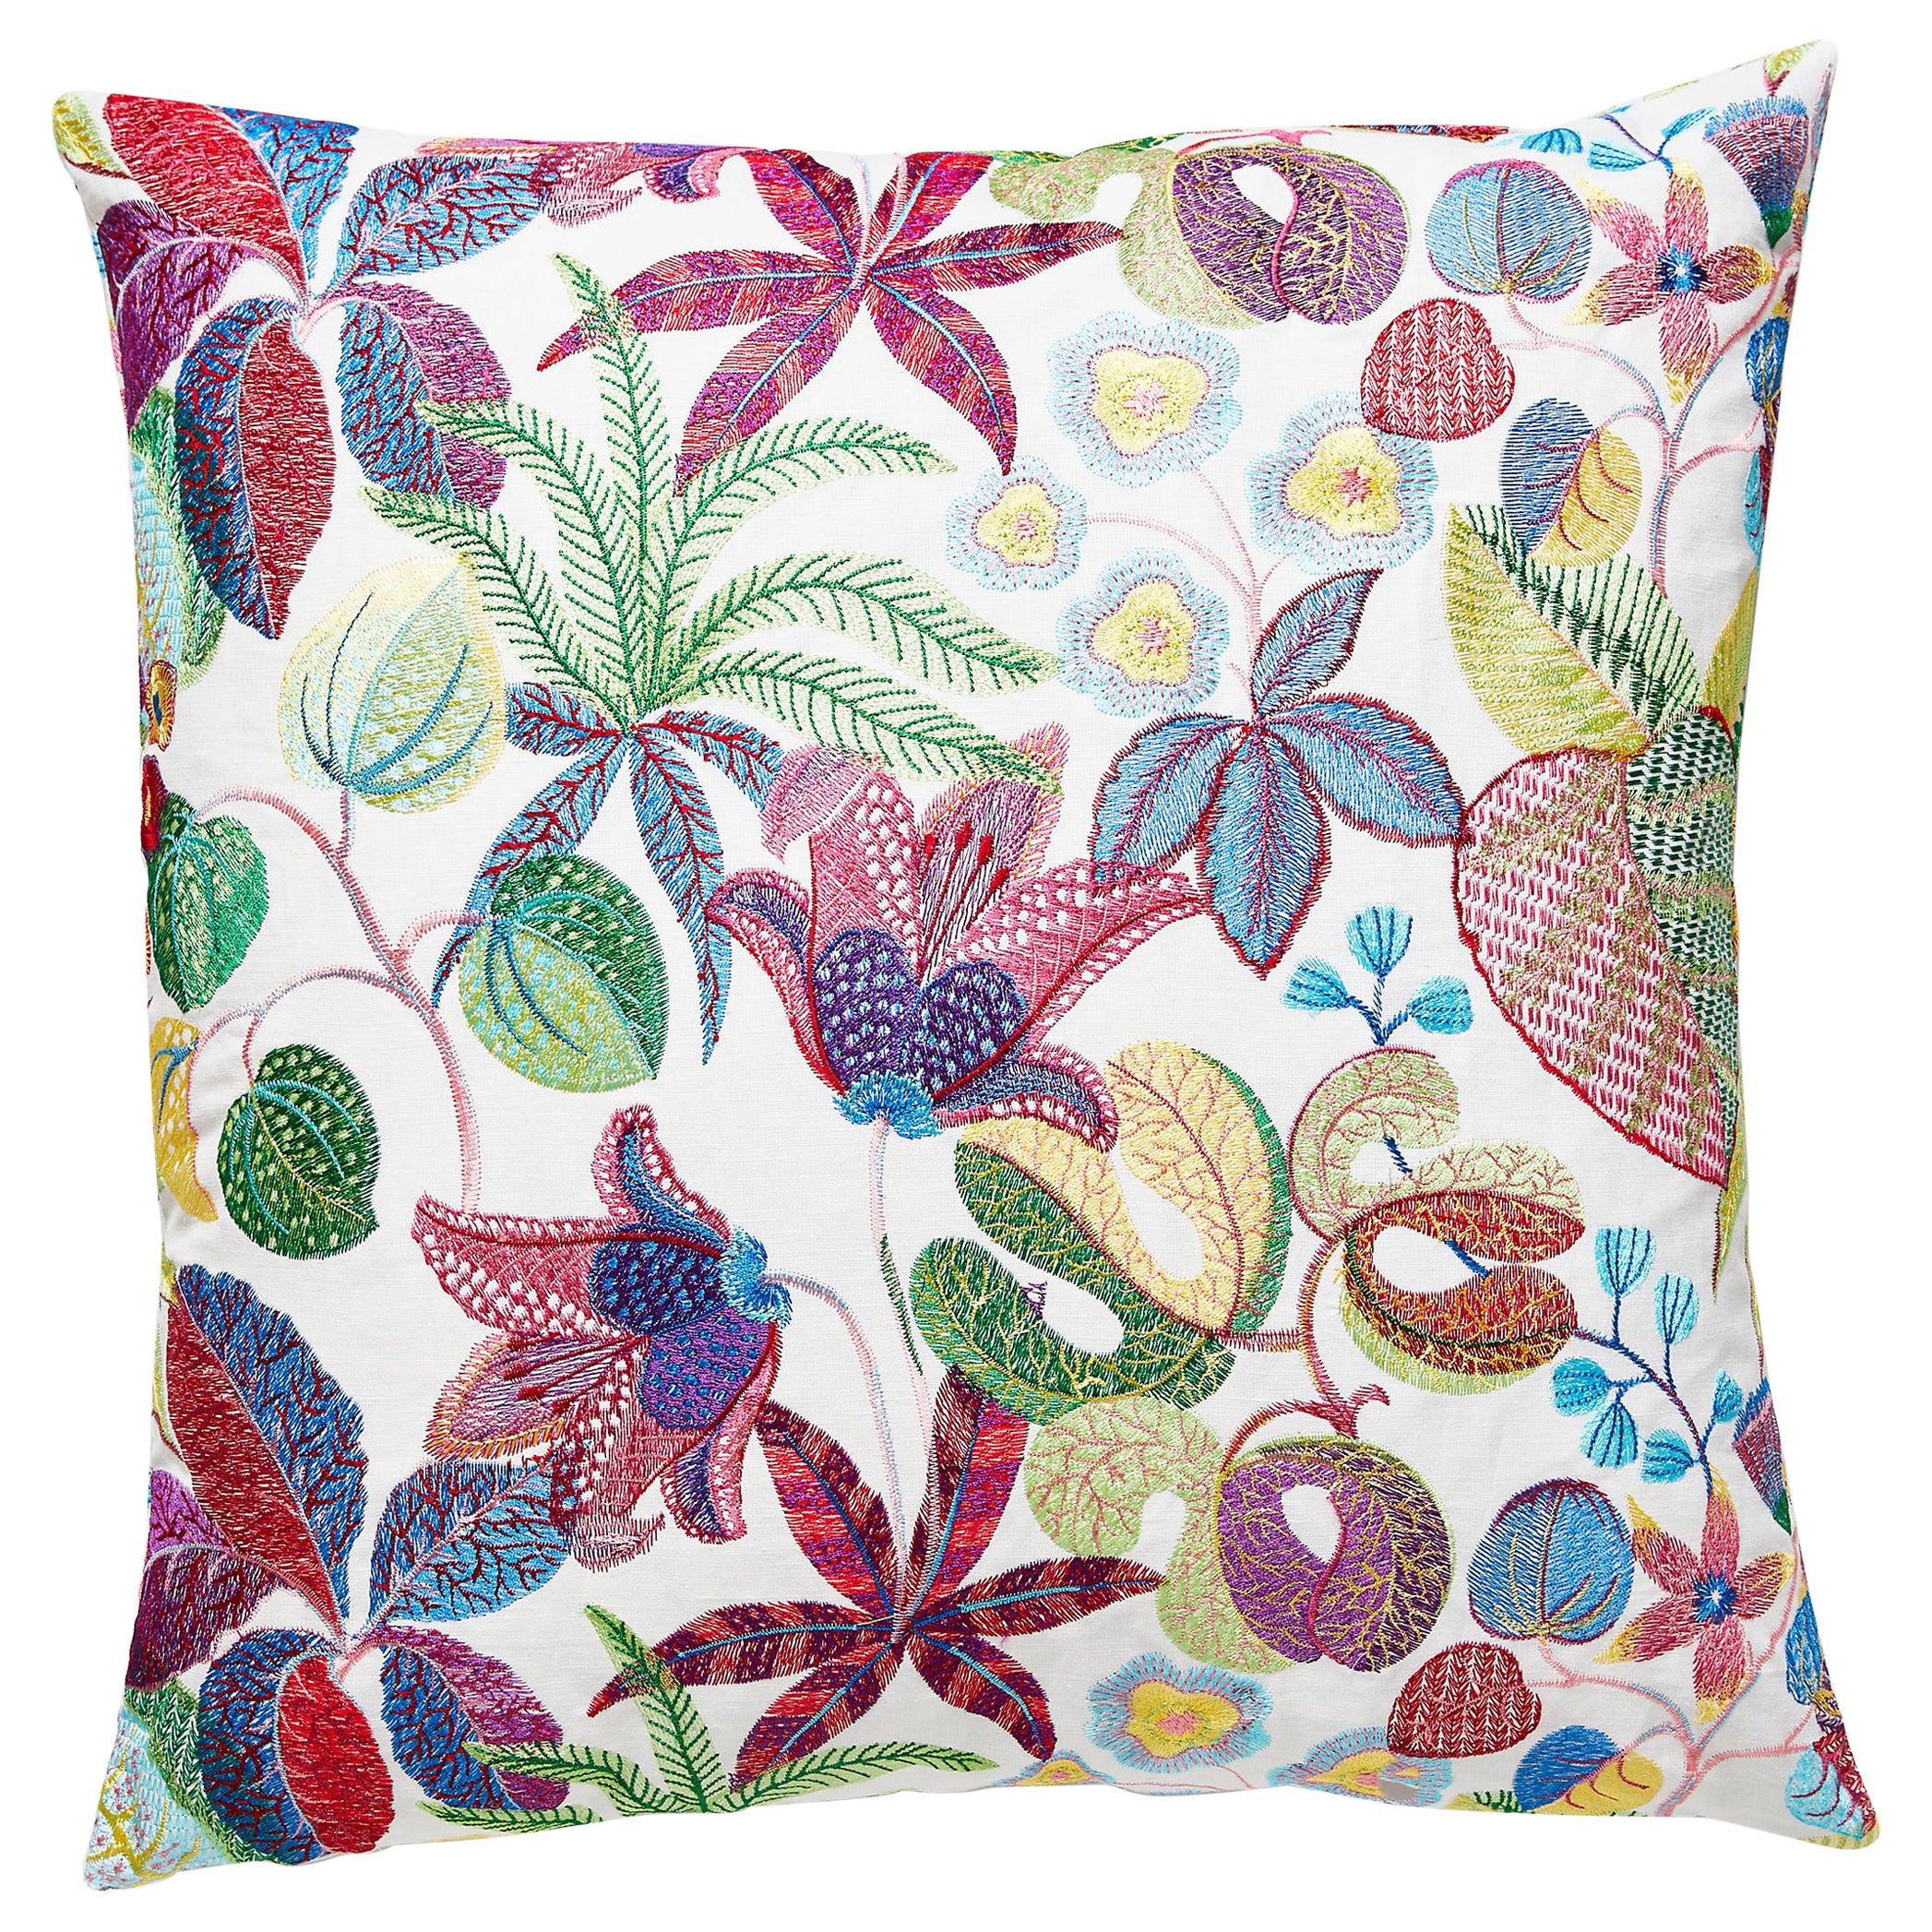 Greenhouse Pillow For Sale